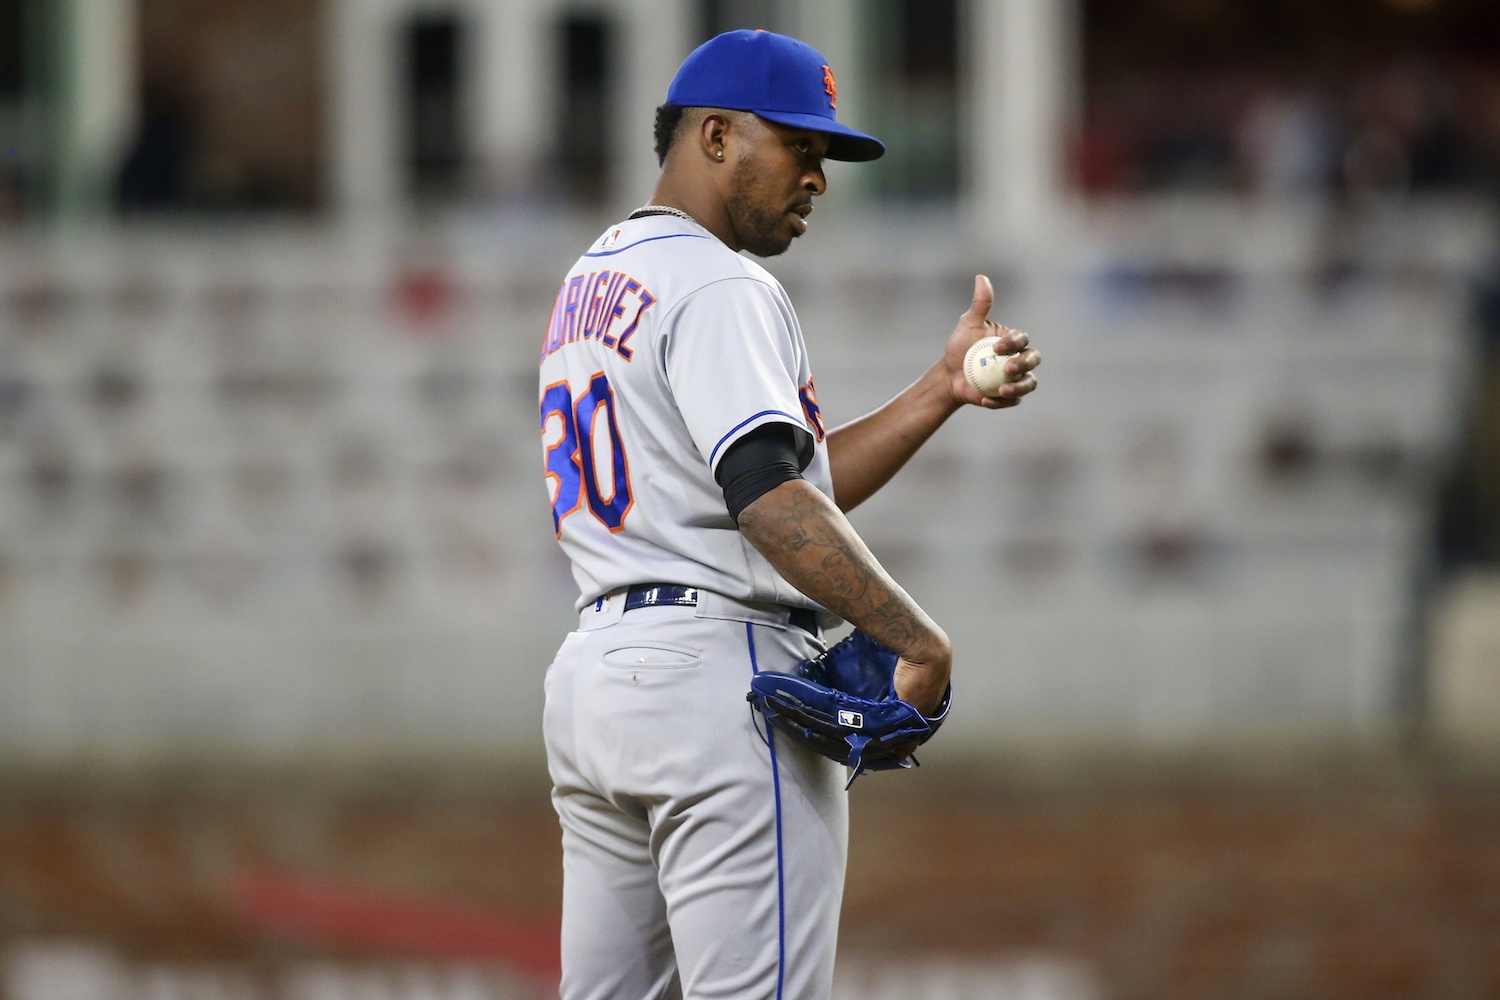 Sep 30, 2022; Atlanta, Georgia, USA; New York Mets relief pitcher Joely Rodriguez (30) reacts after rolling his sleeves up against the Atlanta Braves in the eighth inning at Truist Park. Mandatory Credit: Brett Davis/USA TODAY Sports